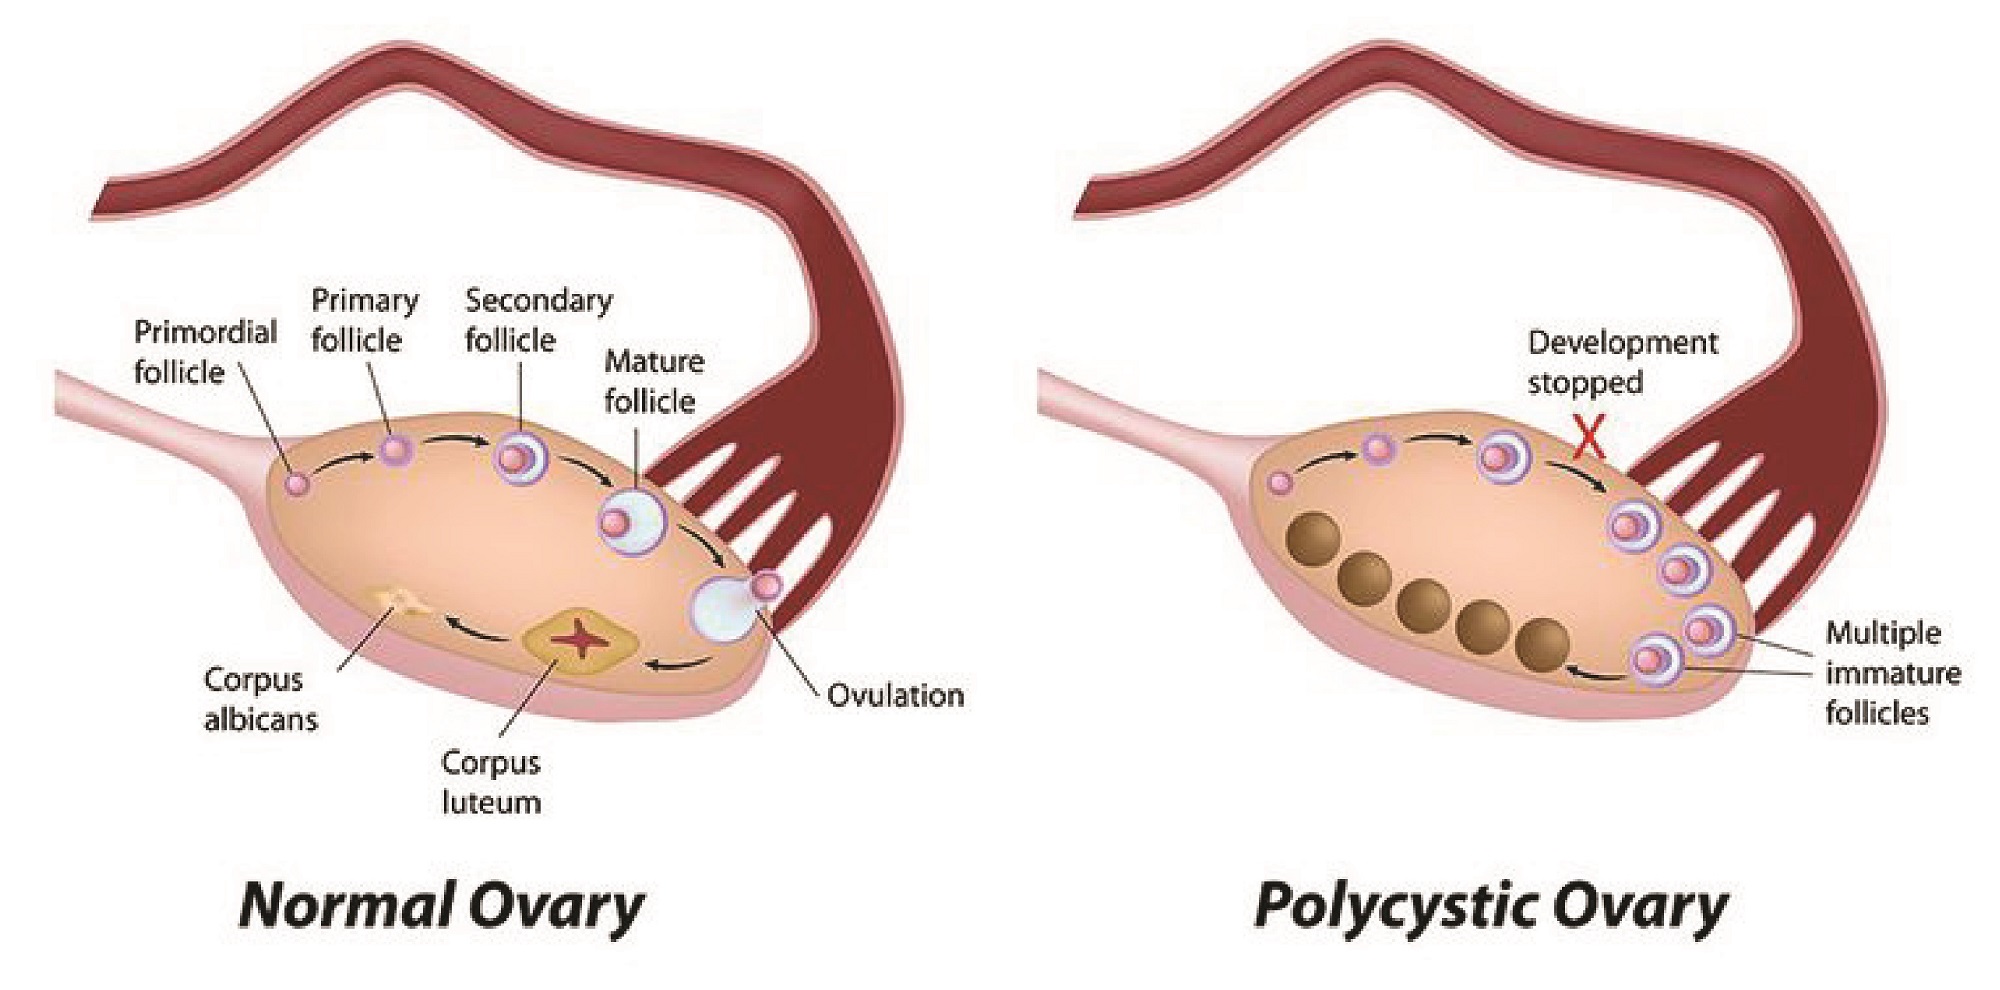 What are the causes and complications of PCOS?